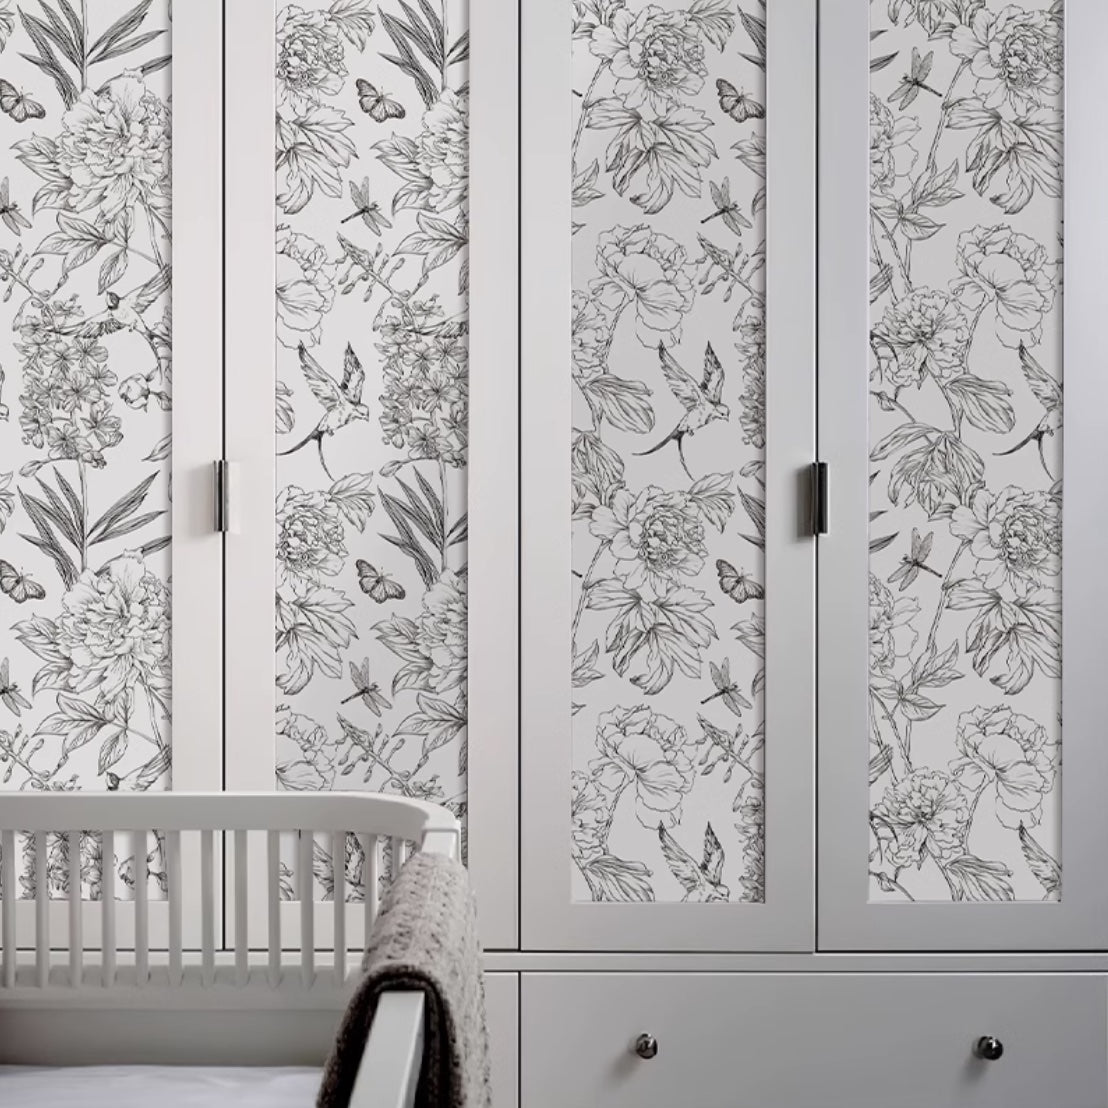 Flowers and birds Peel and stick, wall & furnitures sticker, black and white, 150 cm